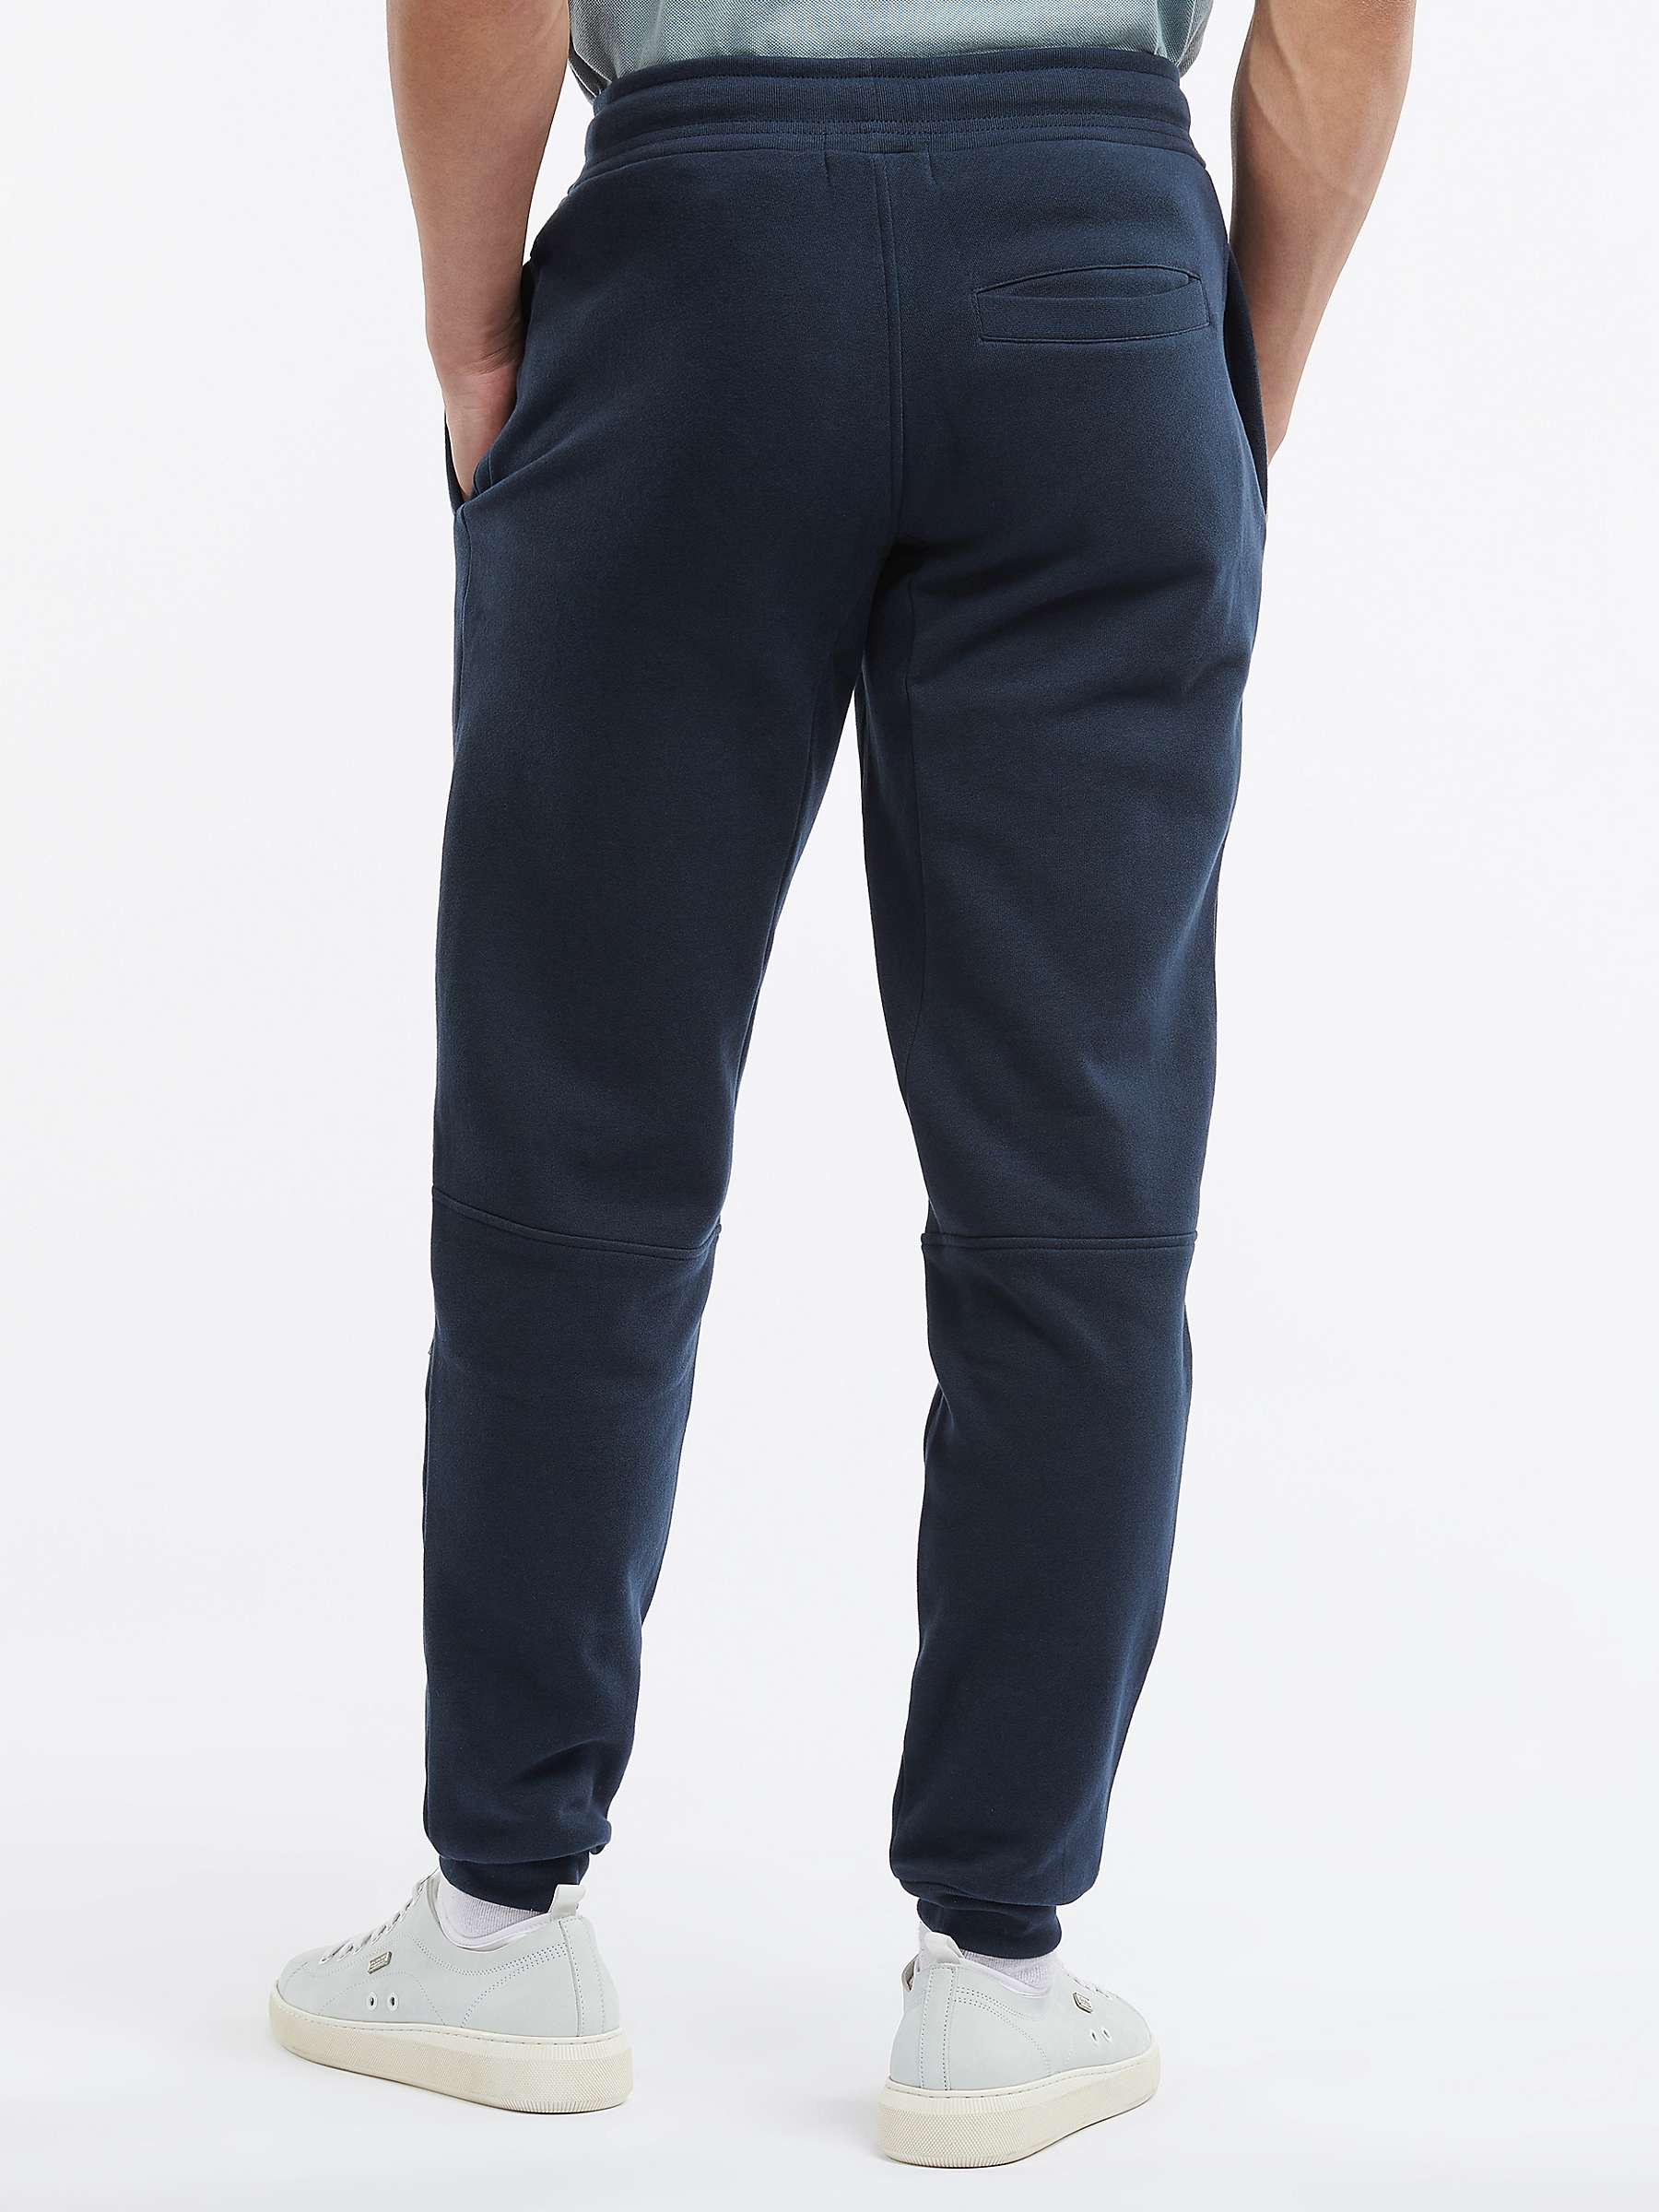 Barbour International Sports Jersey Joggers, Navy at John Lewis & Partners